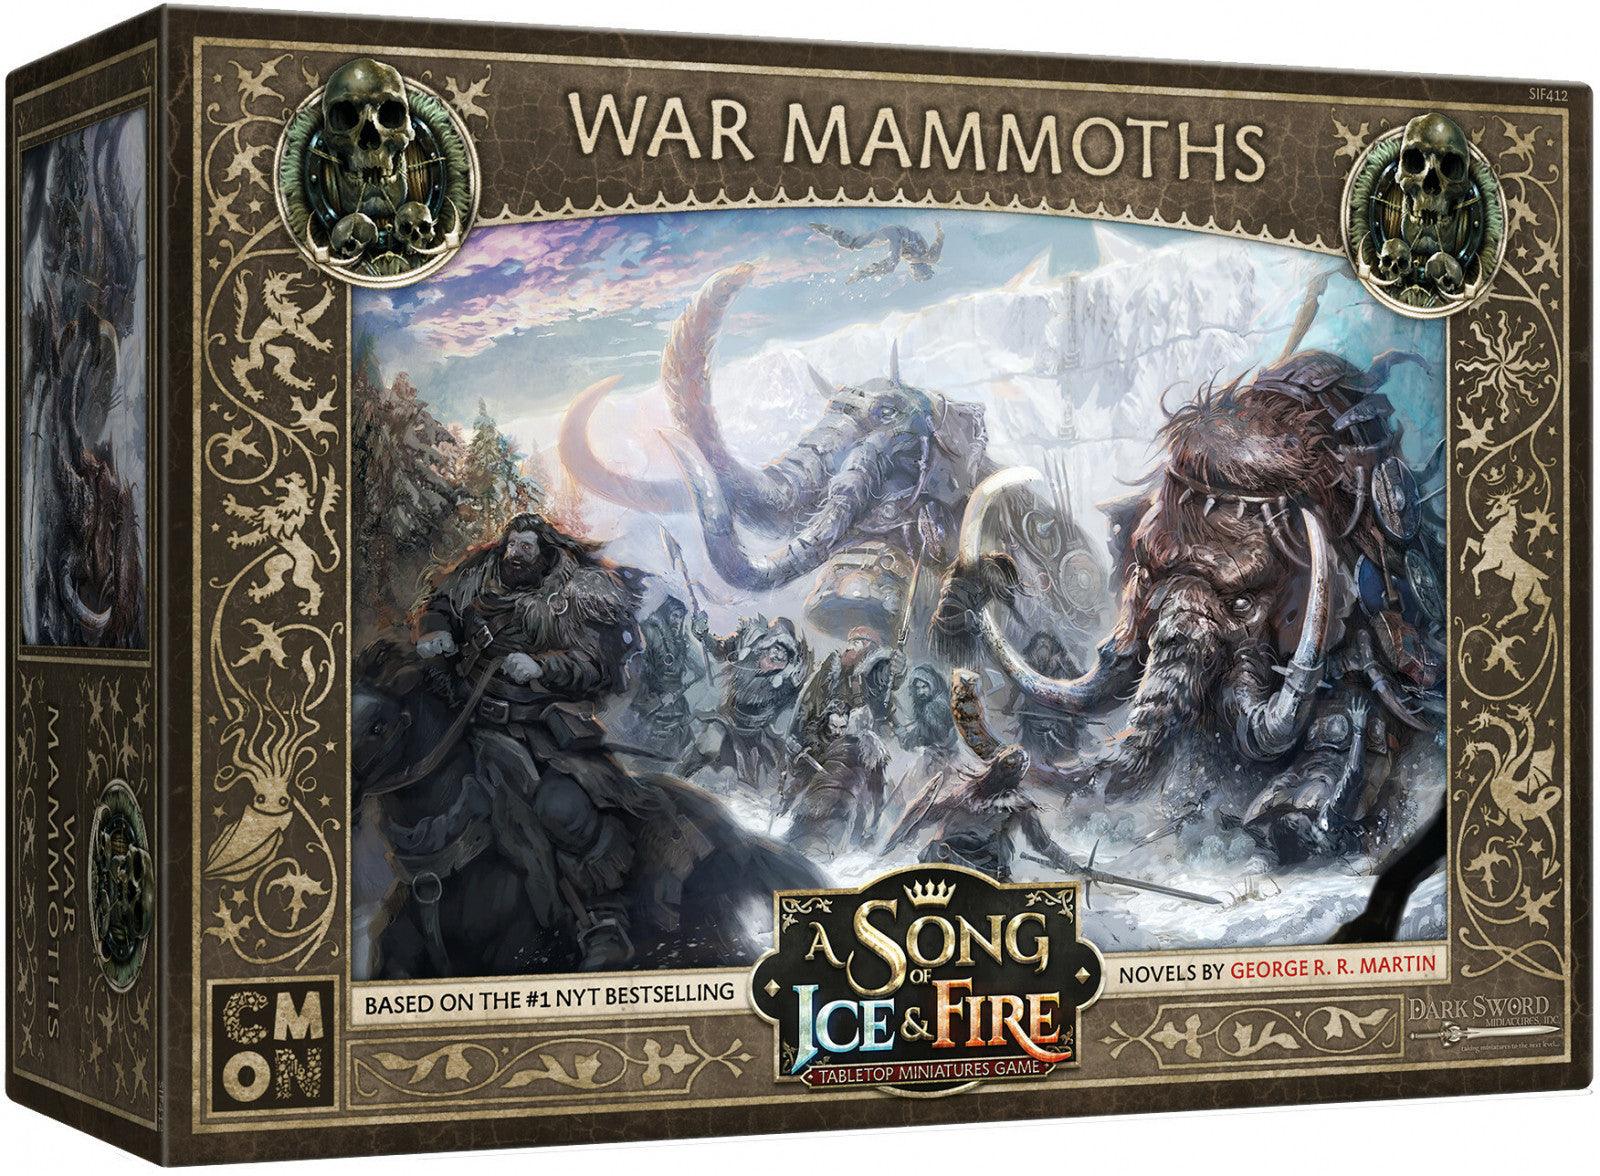 VR-81002 A Song of Ice and Fire TMG - War Mammoths - CMON - Titan Pop Culture